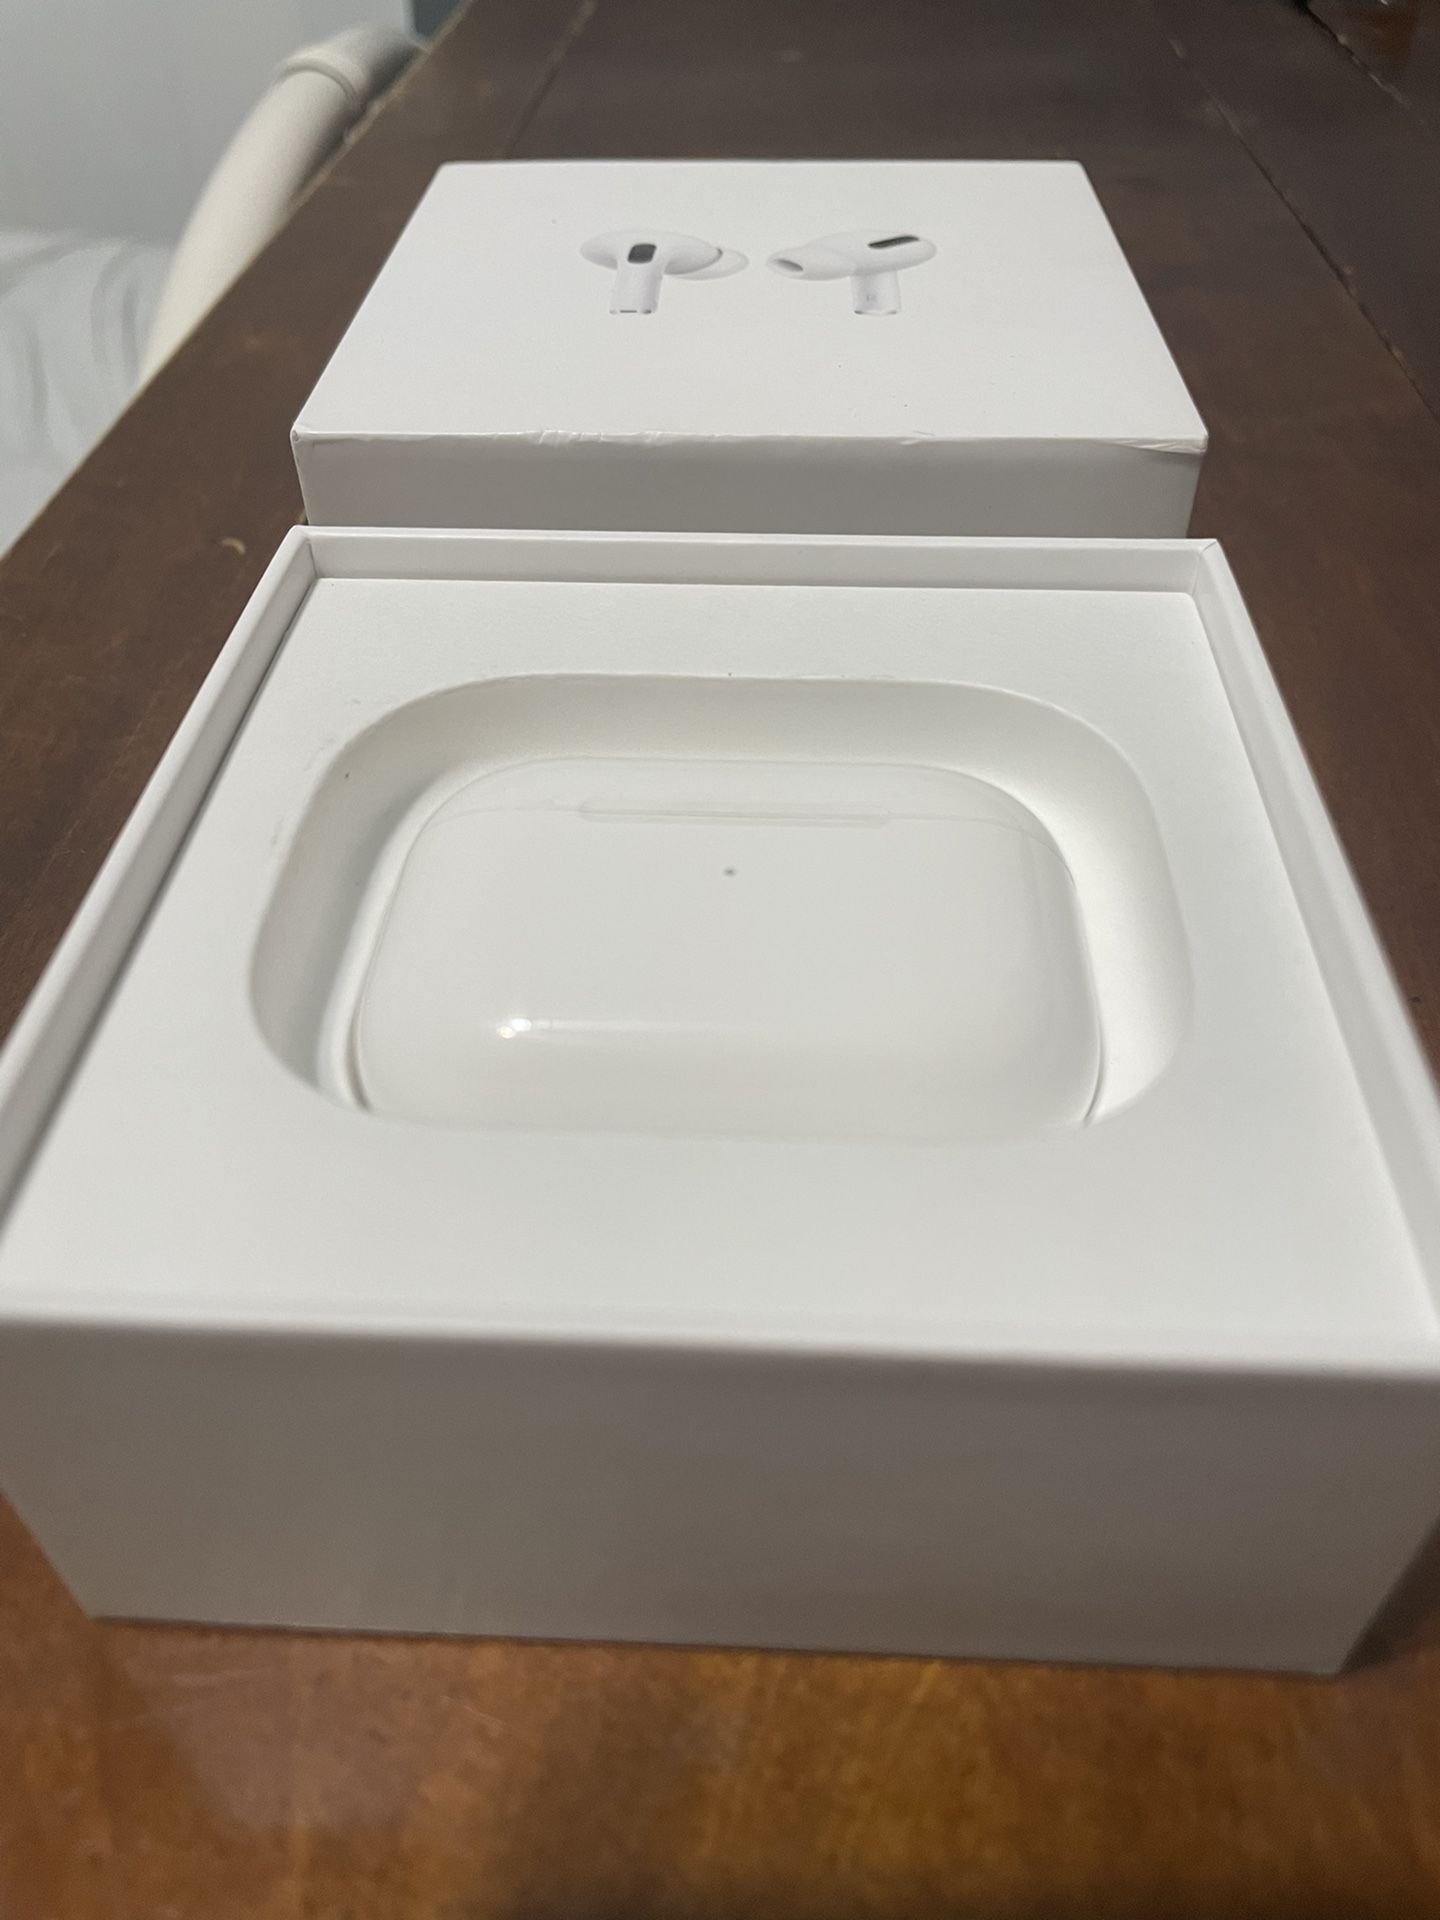 Apple AirPods Pro Charging case 